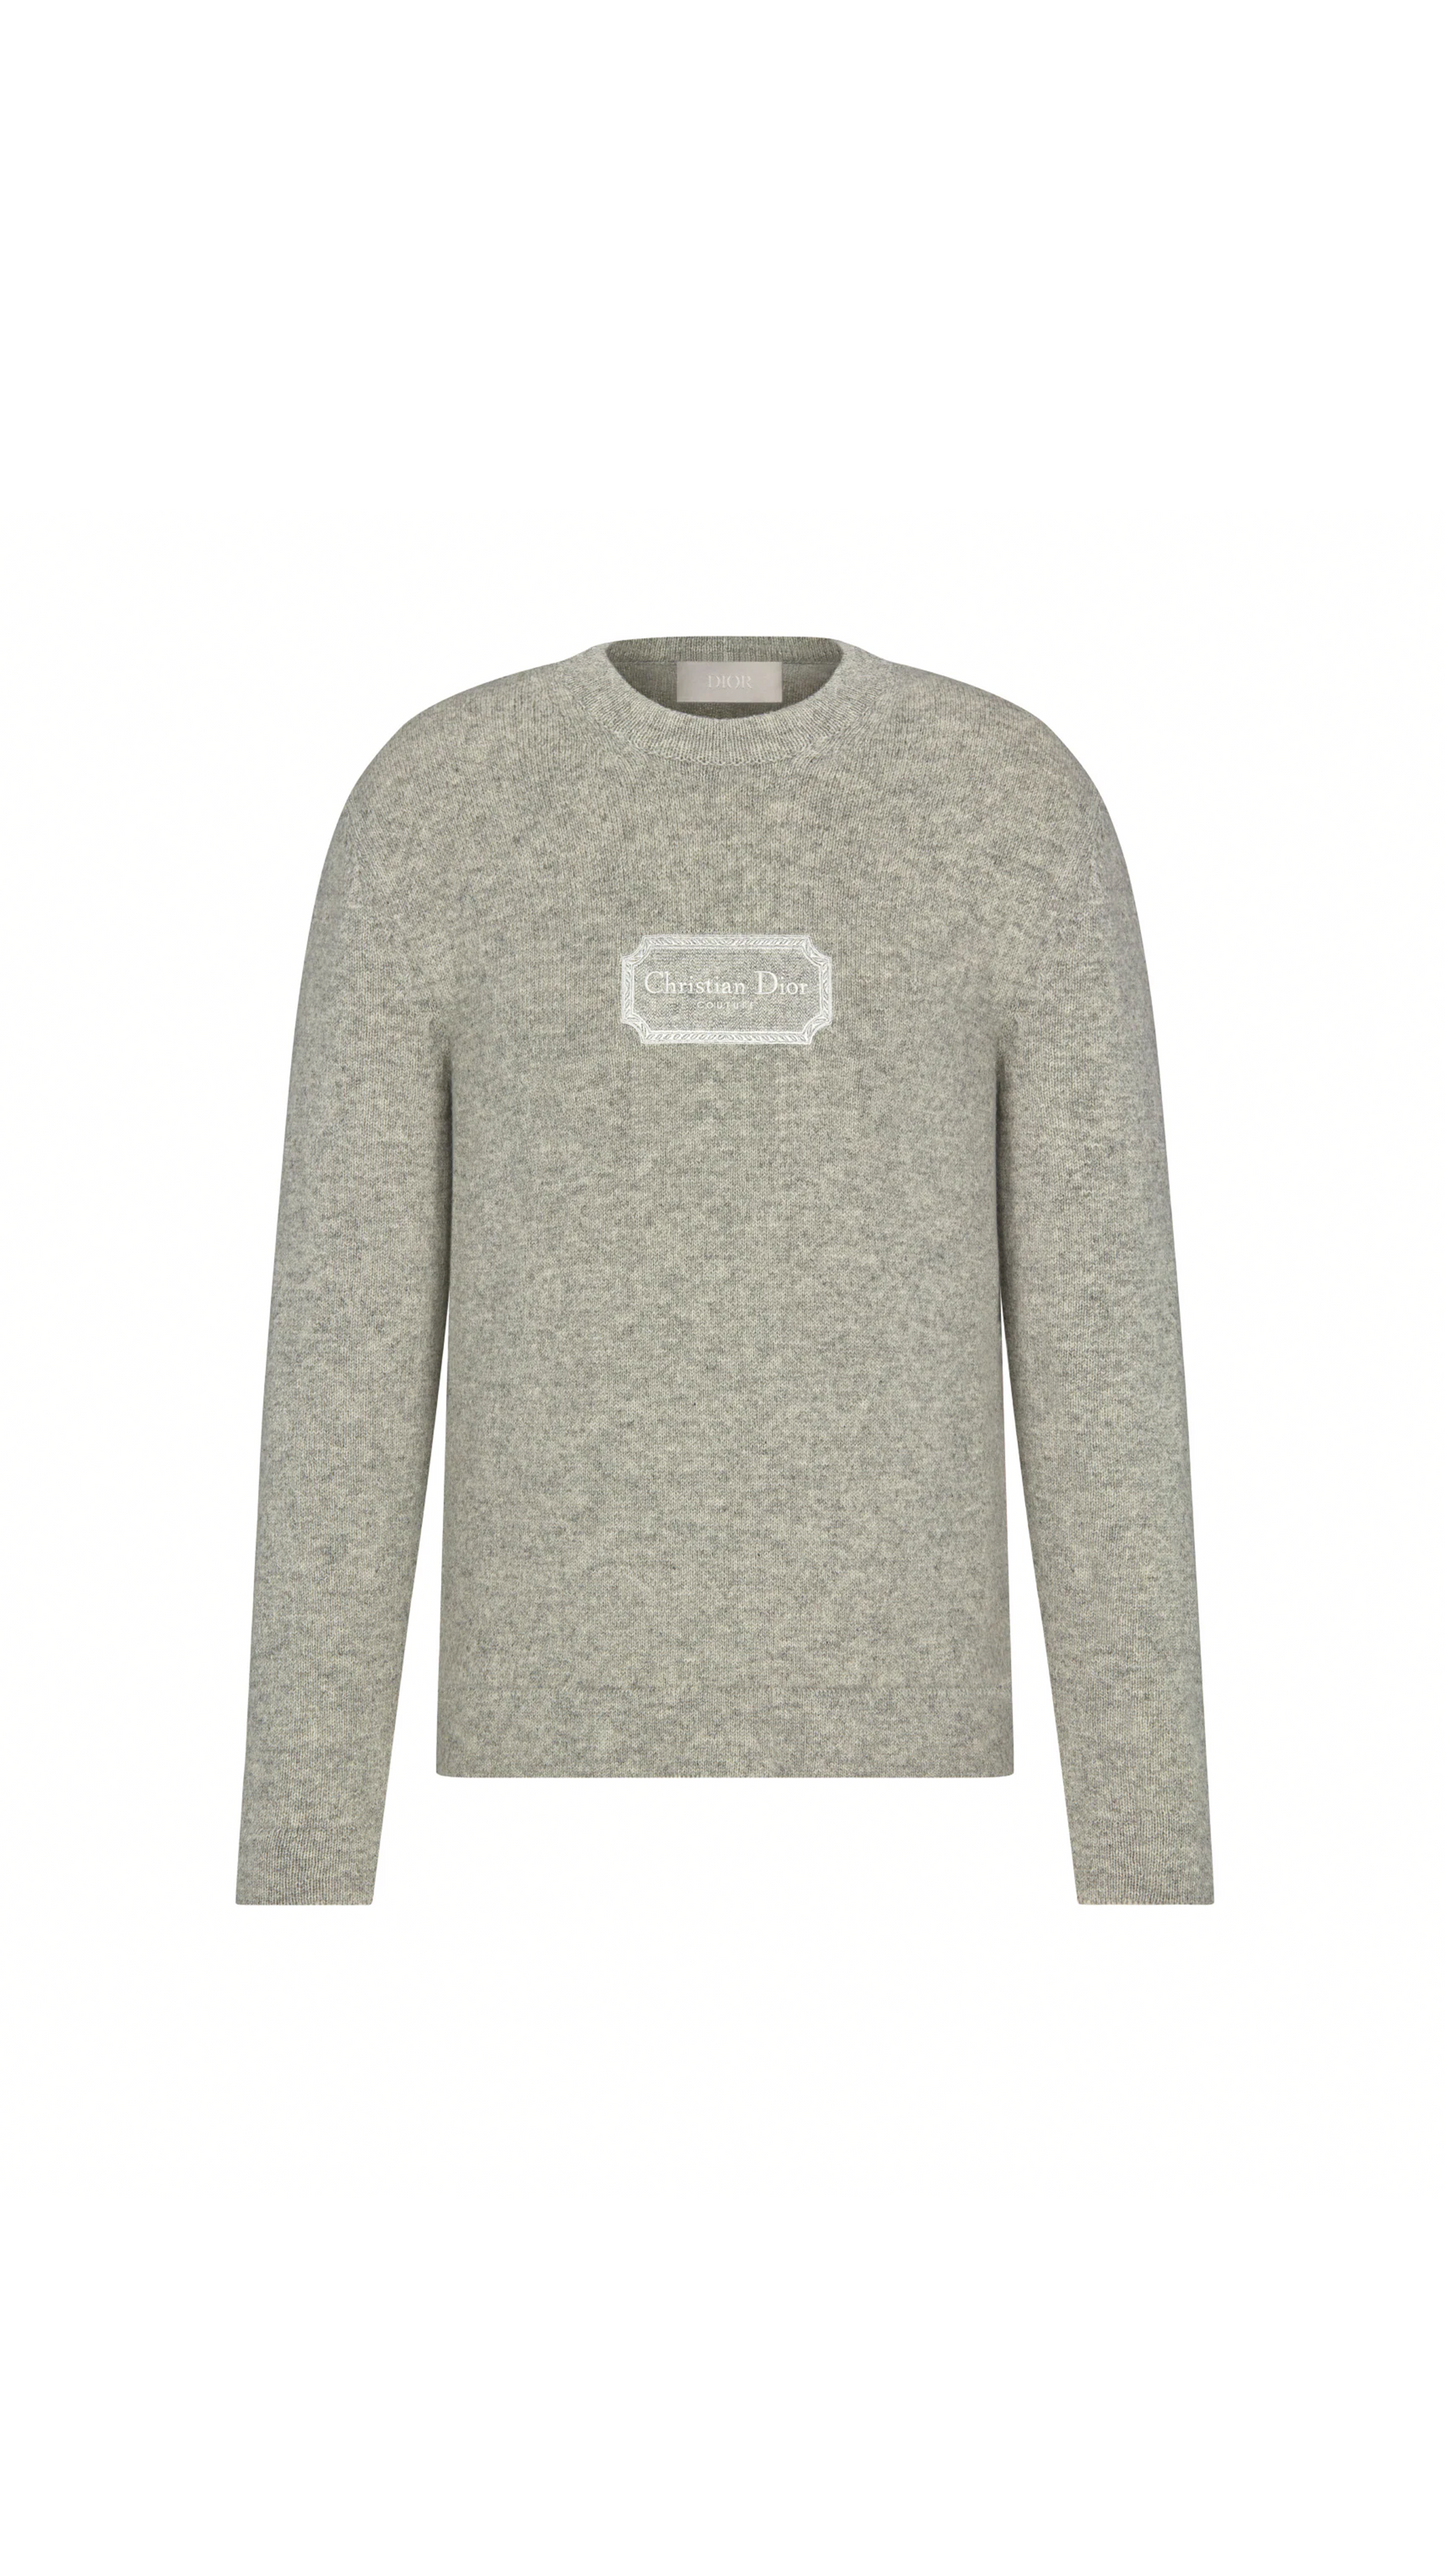 'Christian Dior Couture' Sweater - Gray